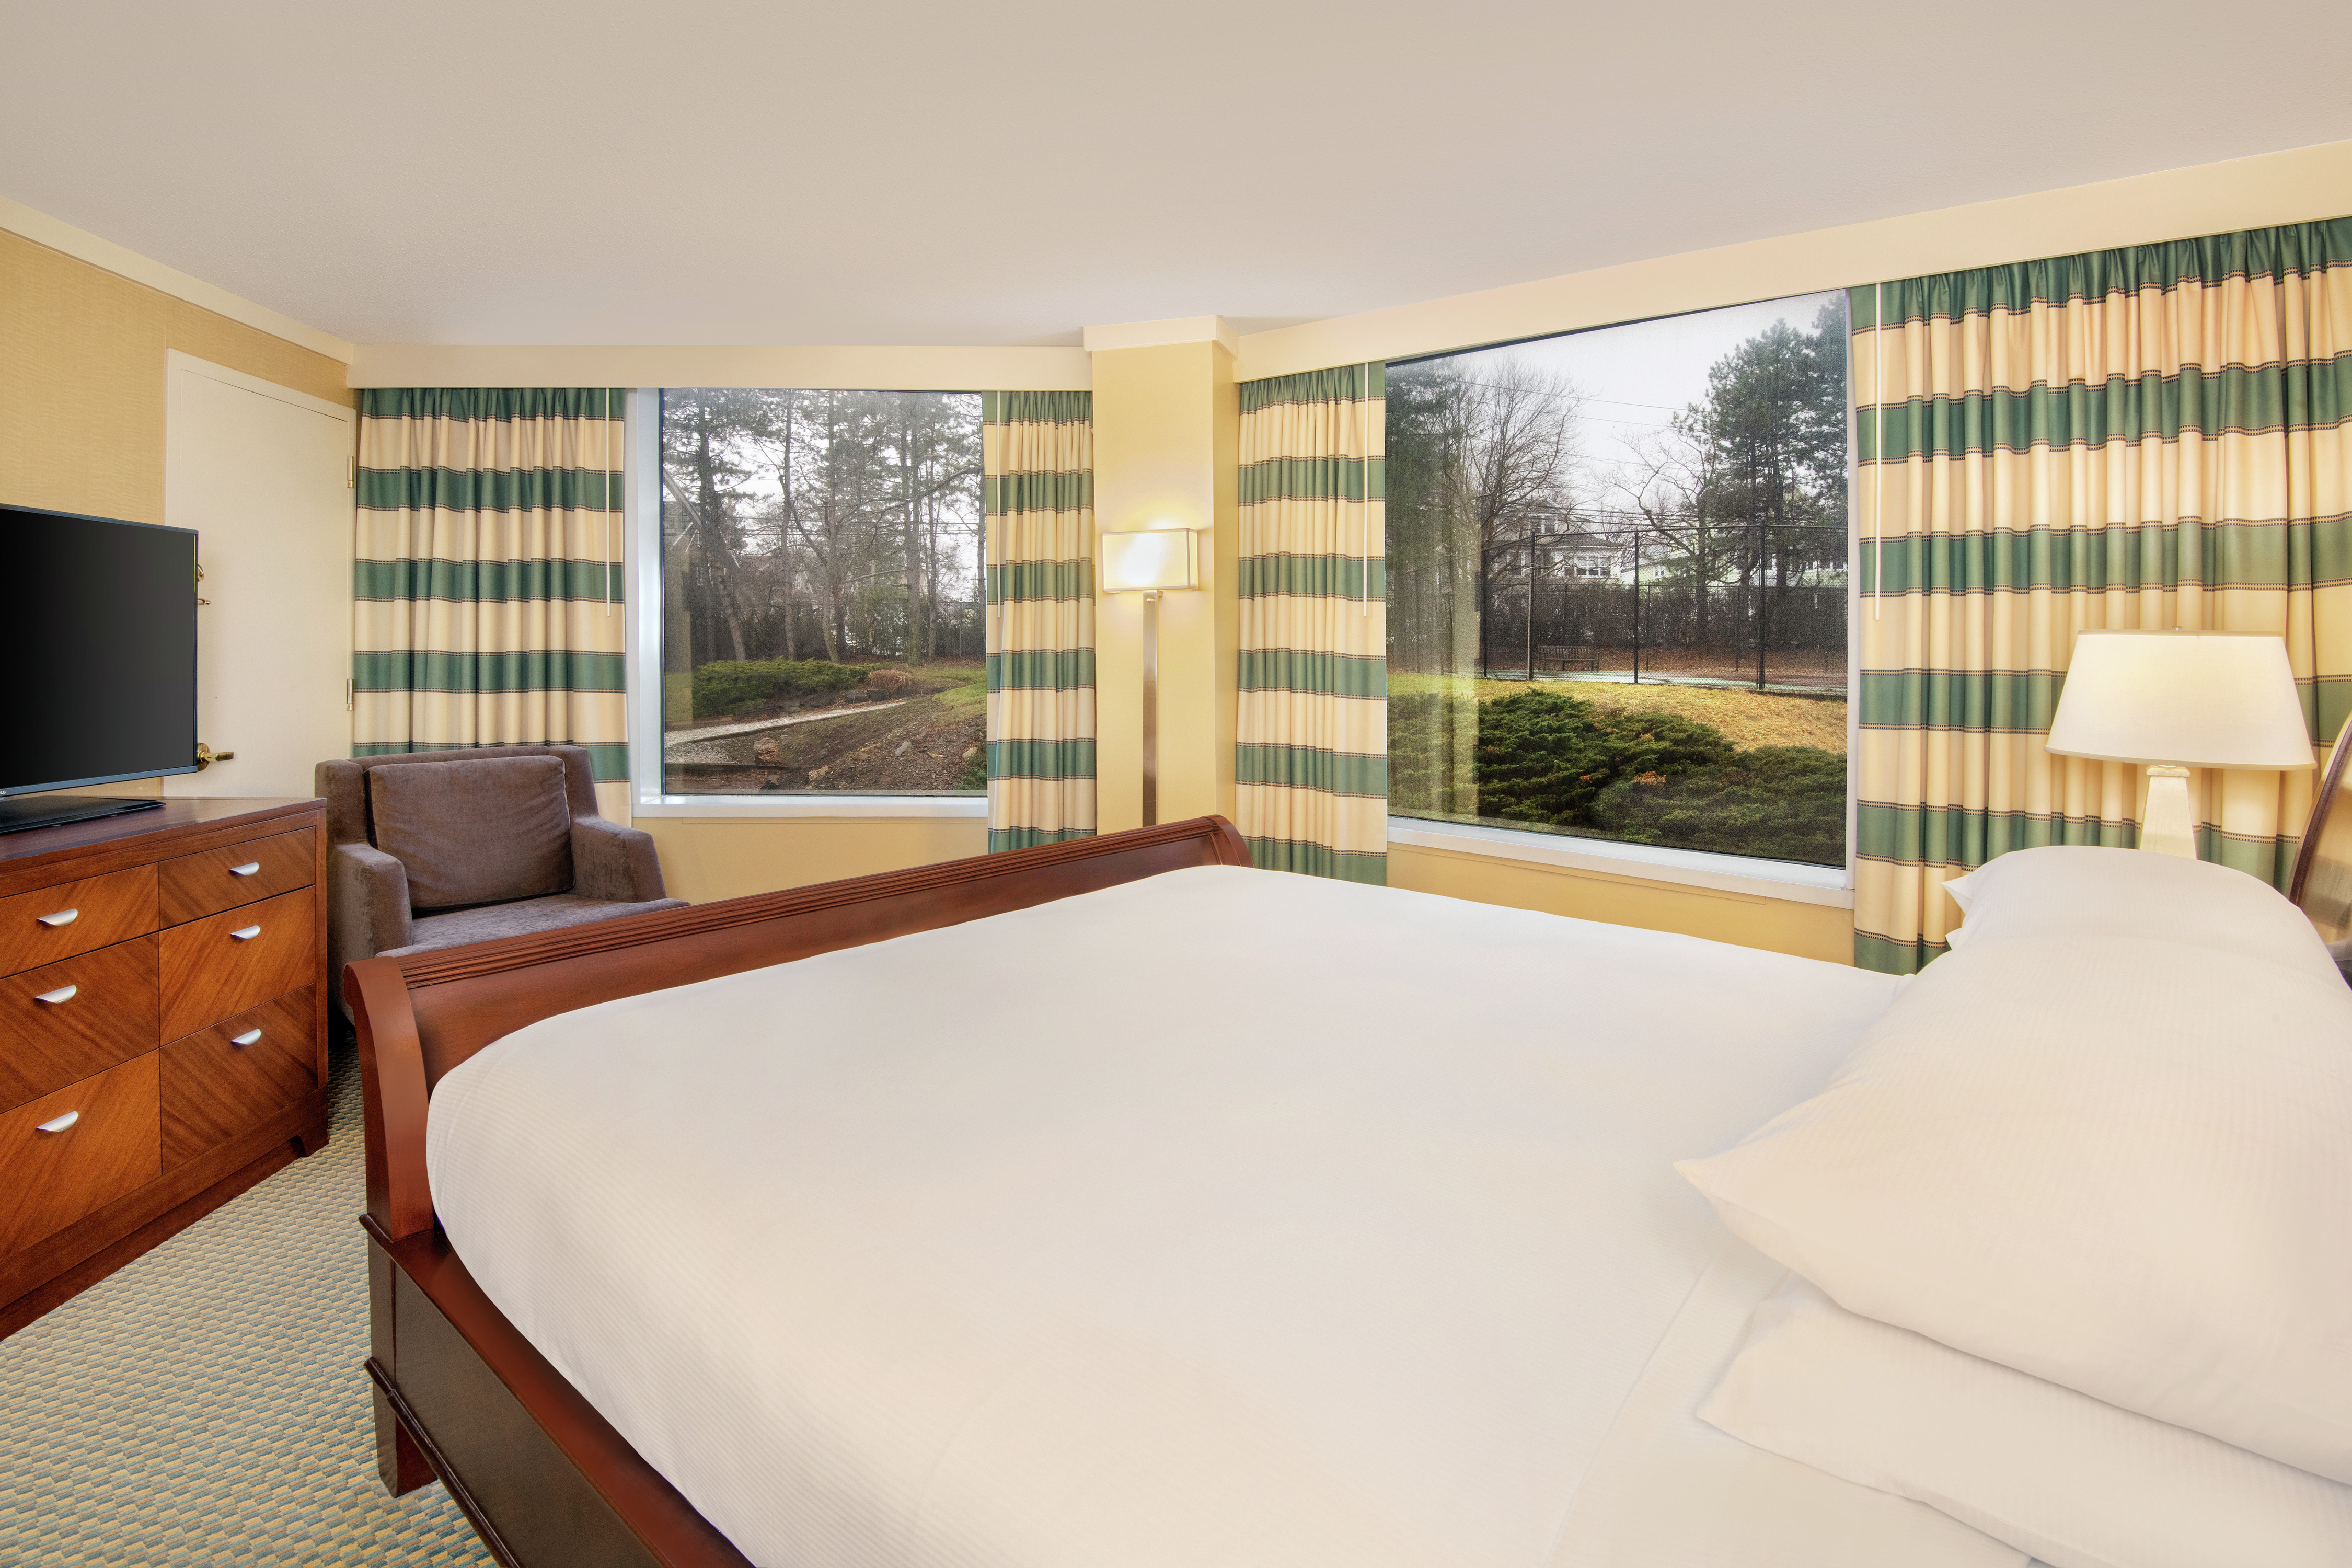 King Suite with Bed, Lounge Area, Outside View, and Room Technology